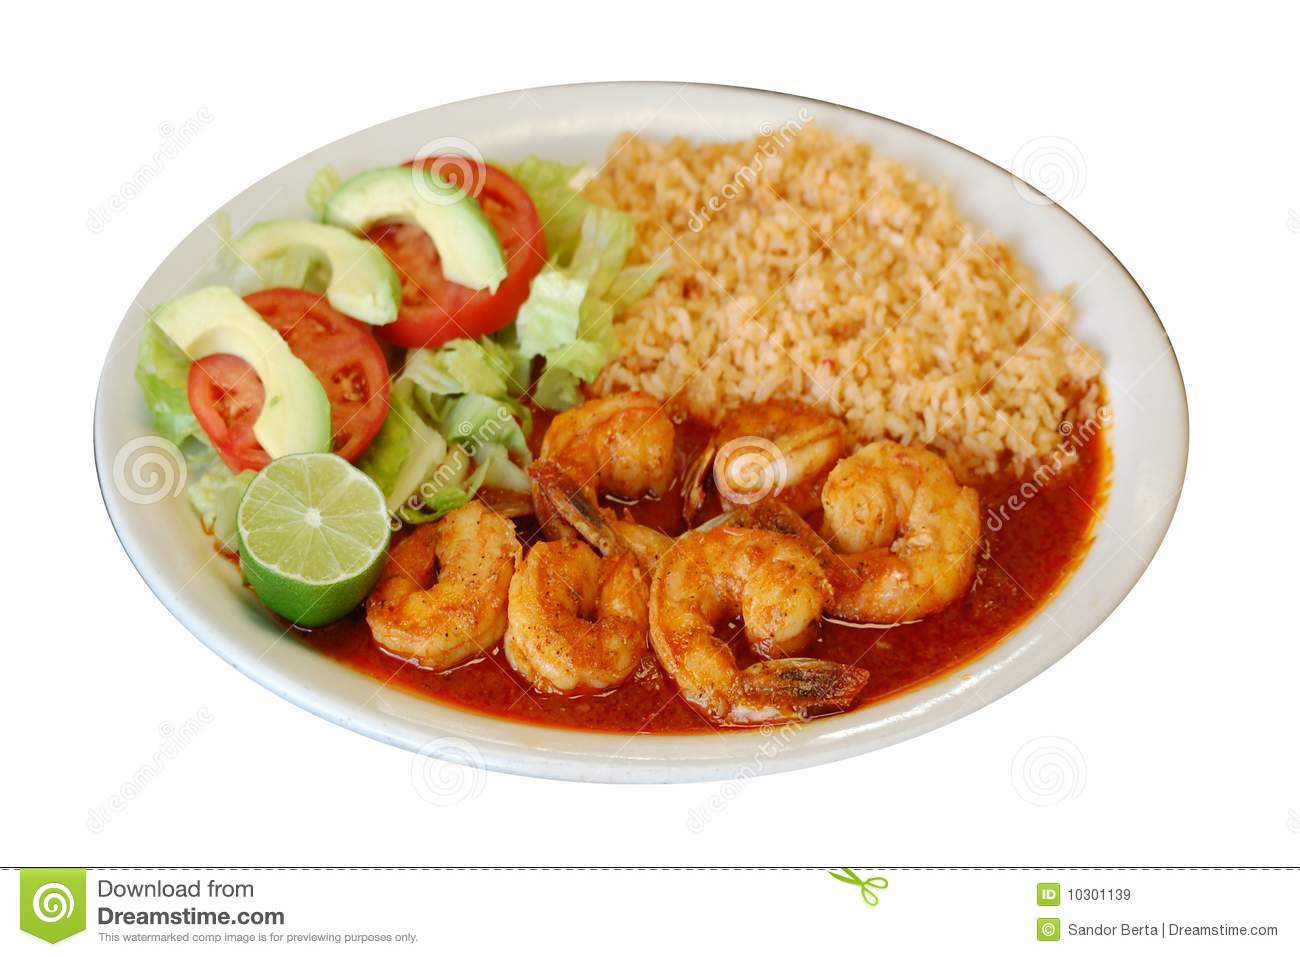 Mexican Shrimp Rice Is A Very Good Plate With The Seafood Taste